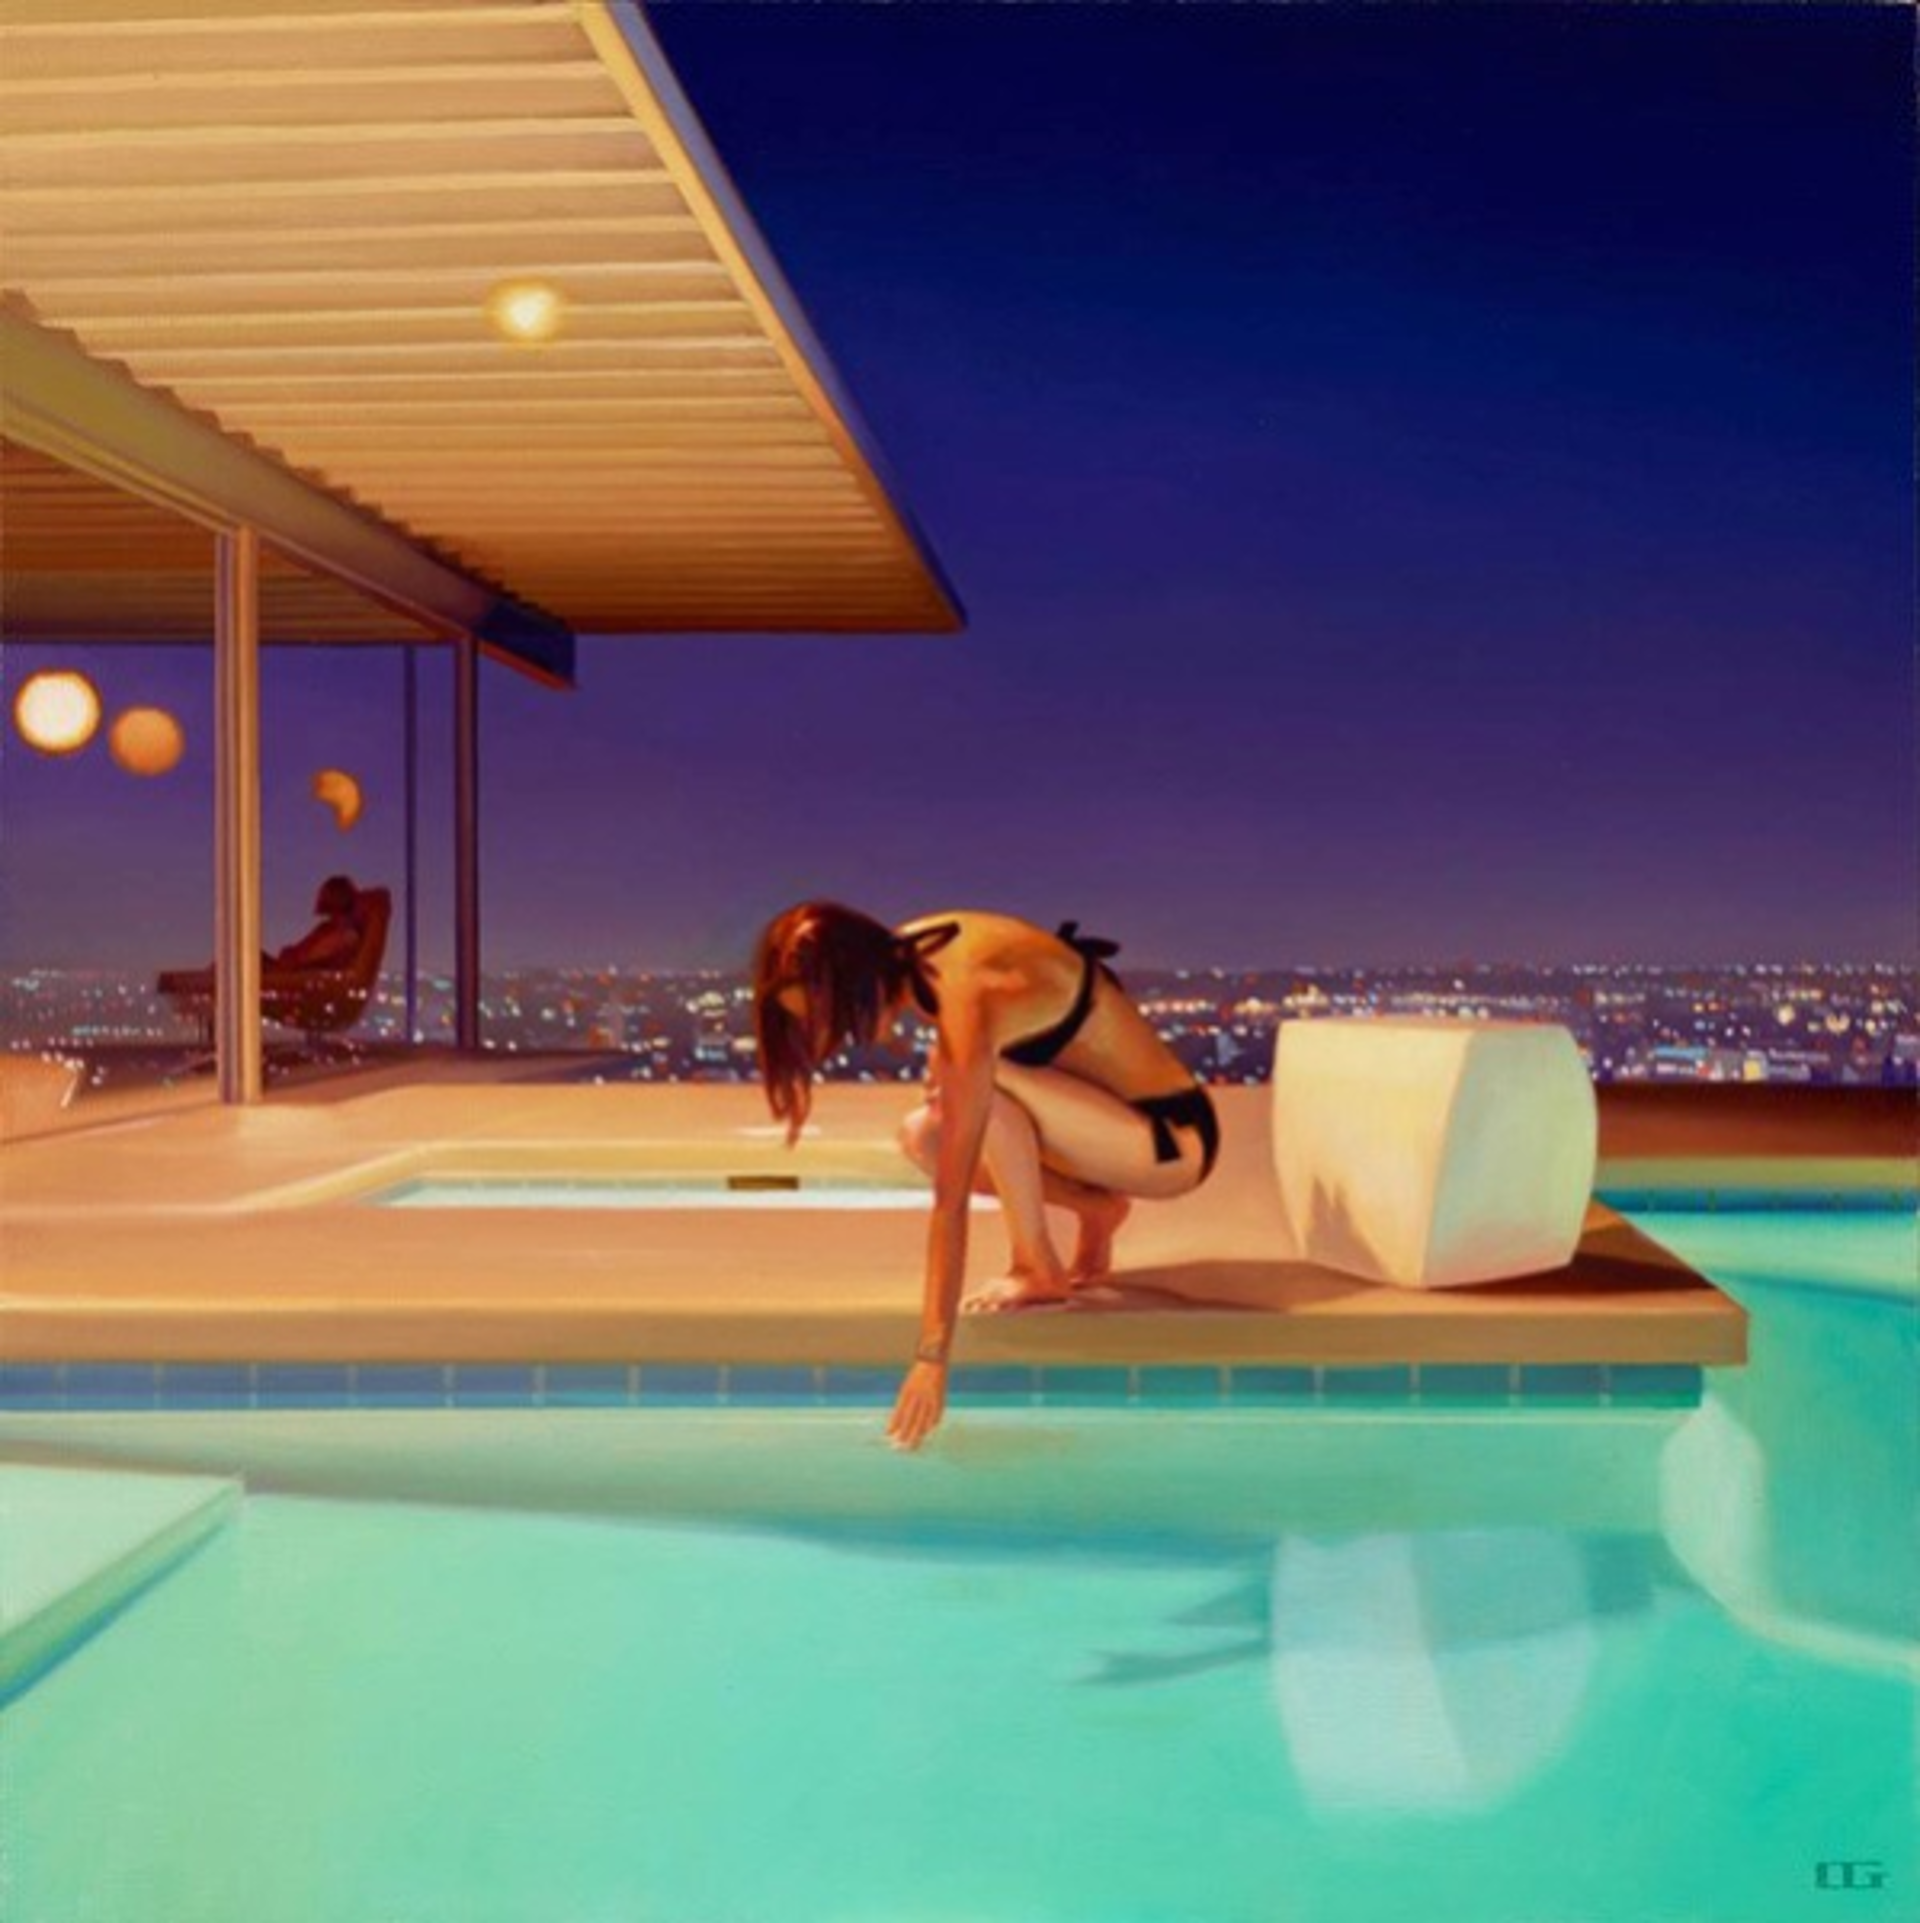 Elements by Carrie Graber